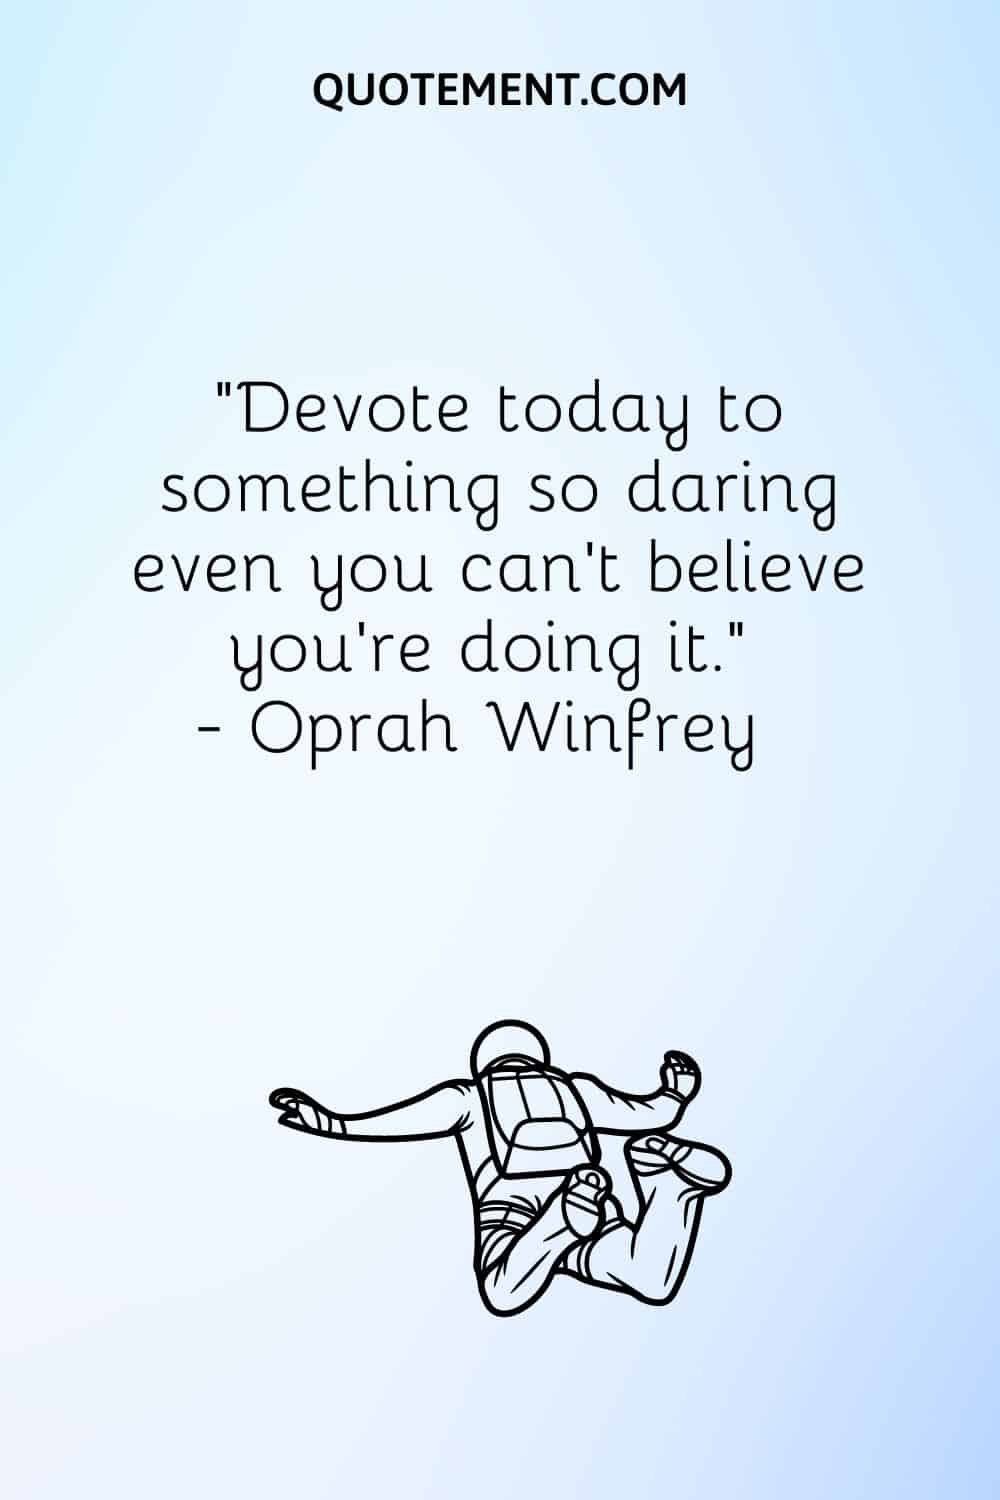 Devote today to something so daring even you can’t believe you’re doing it